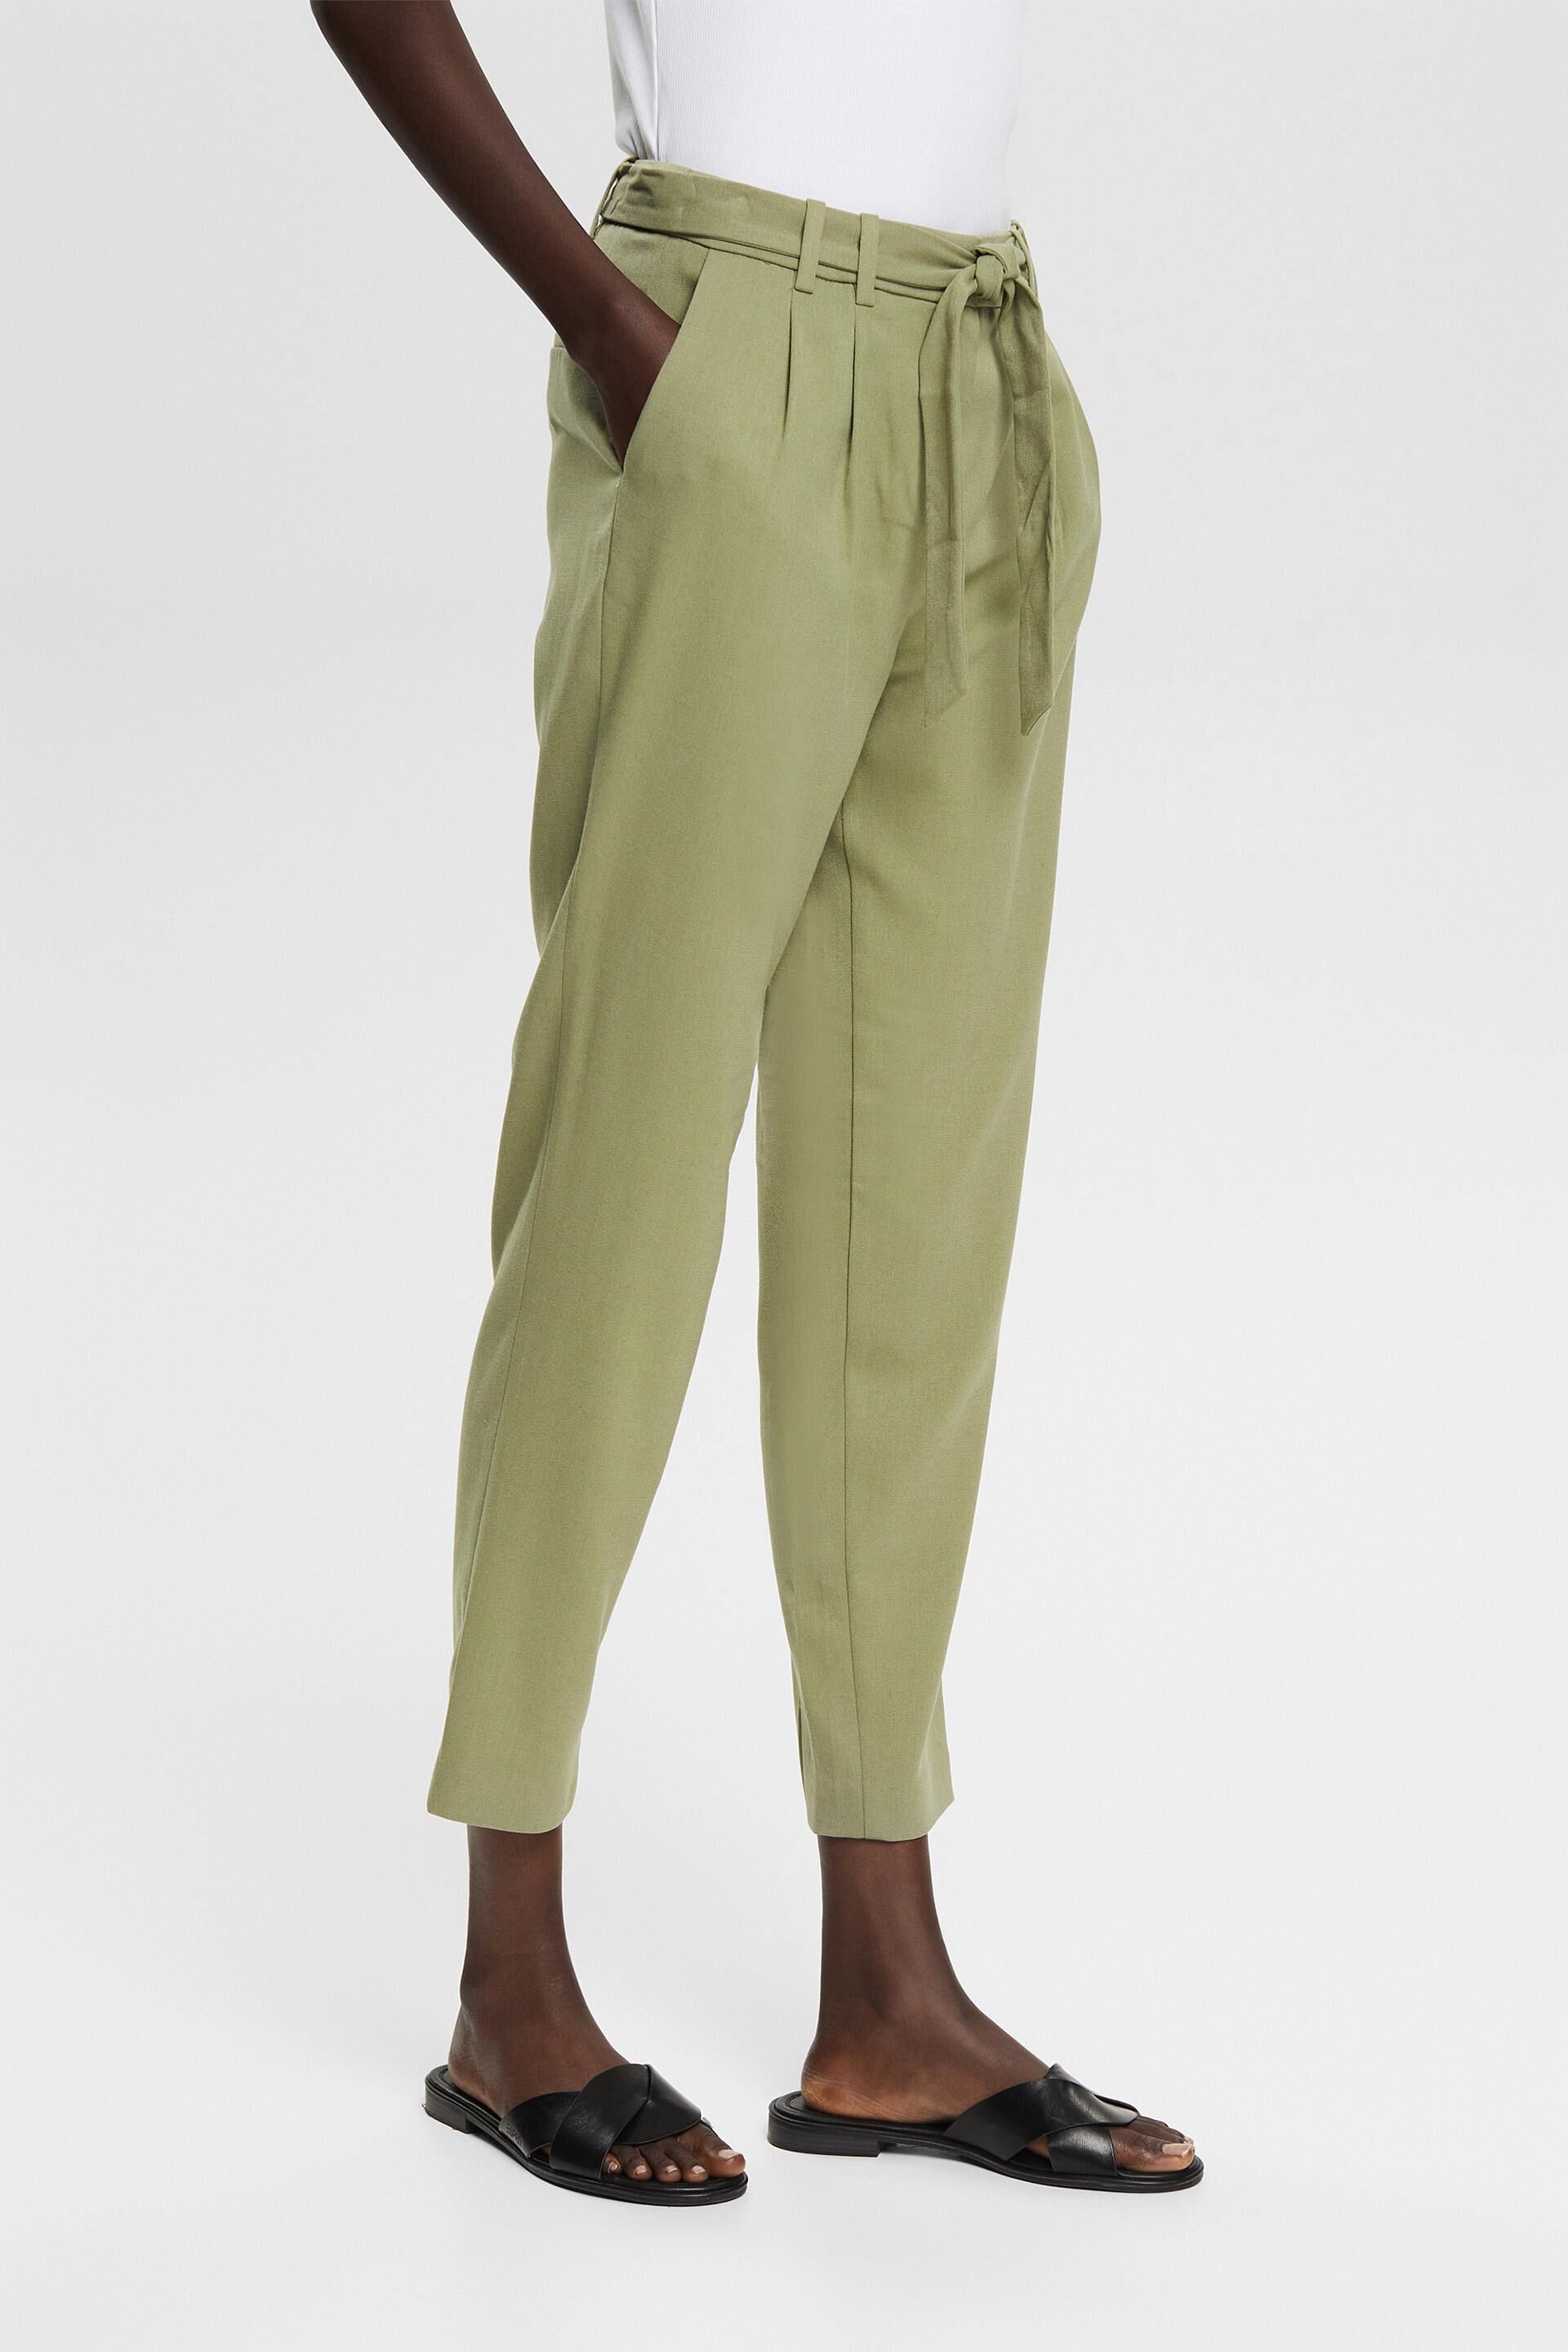 Slacks and Chinos Skinny trousers Womens Clothing Trousers Esprit 101ee1b319 Trouser in Green 